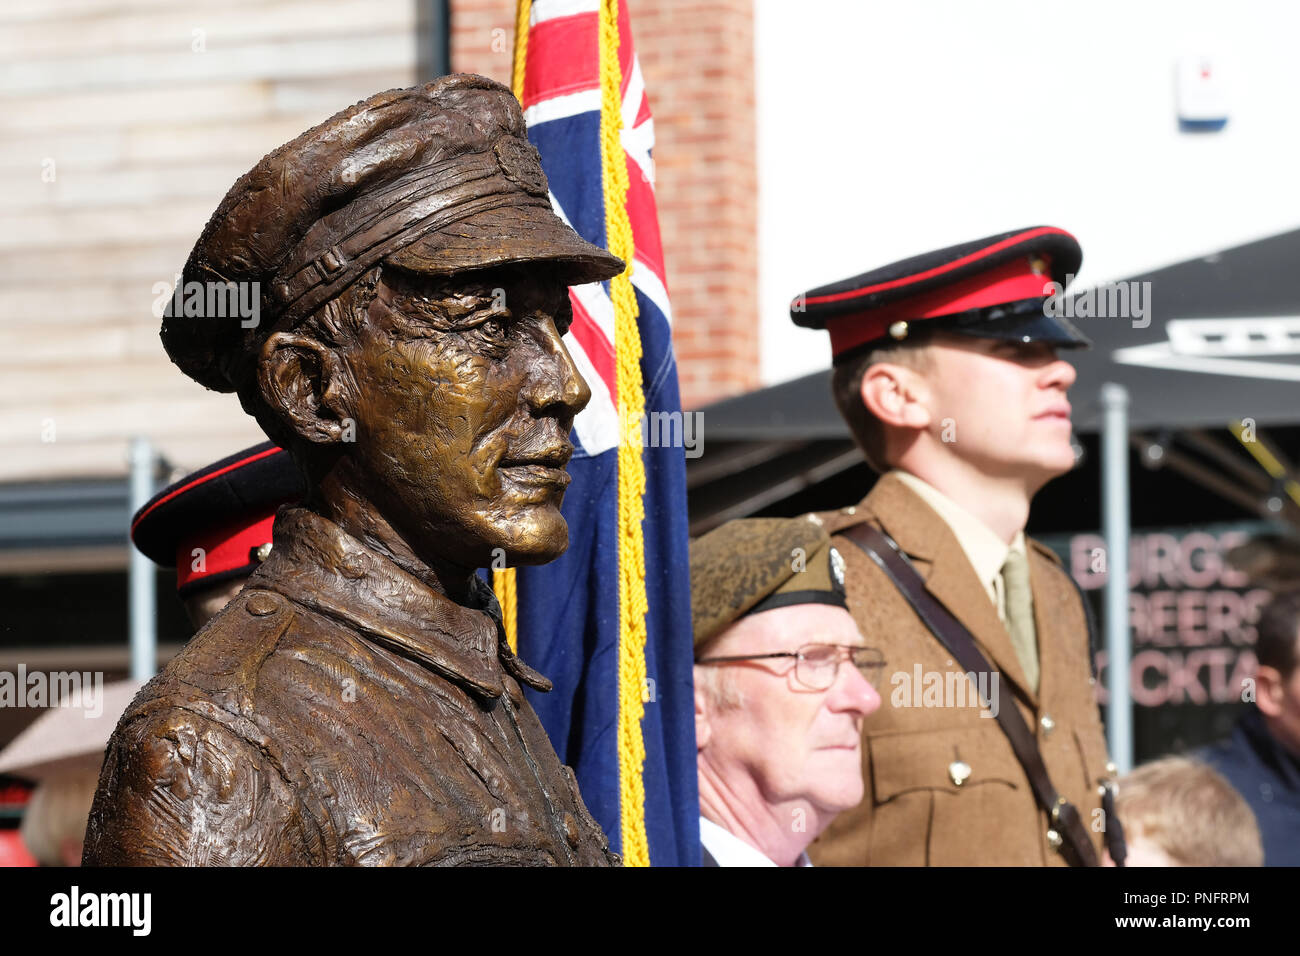 Hereford, Herefordshire, UK - Friday 21st September 2018 - New statue of Lance Corporal Allan Leonard Lewis VC unveiled today in Hereford - L/Cpl Allan Lewis VC was awarded the Victoria Cross posthumously ( aged 23 years ) for his 'most conspicuous bravery' during the Battle of Epehy in Northern France along the Hidenburg Line  - he was killed in action exactly 100 years to the day on 21st September 1918 and is the only soldier born in Herefordshire to win the VC . Photo Steven May / Alamy Live News Stock Photo